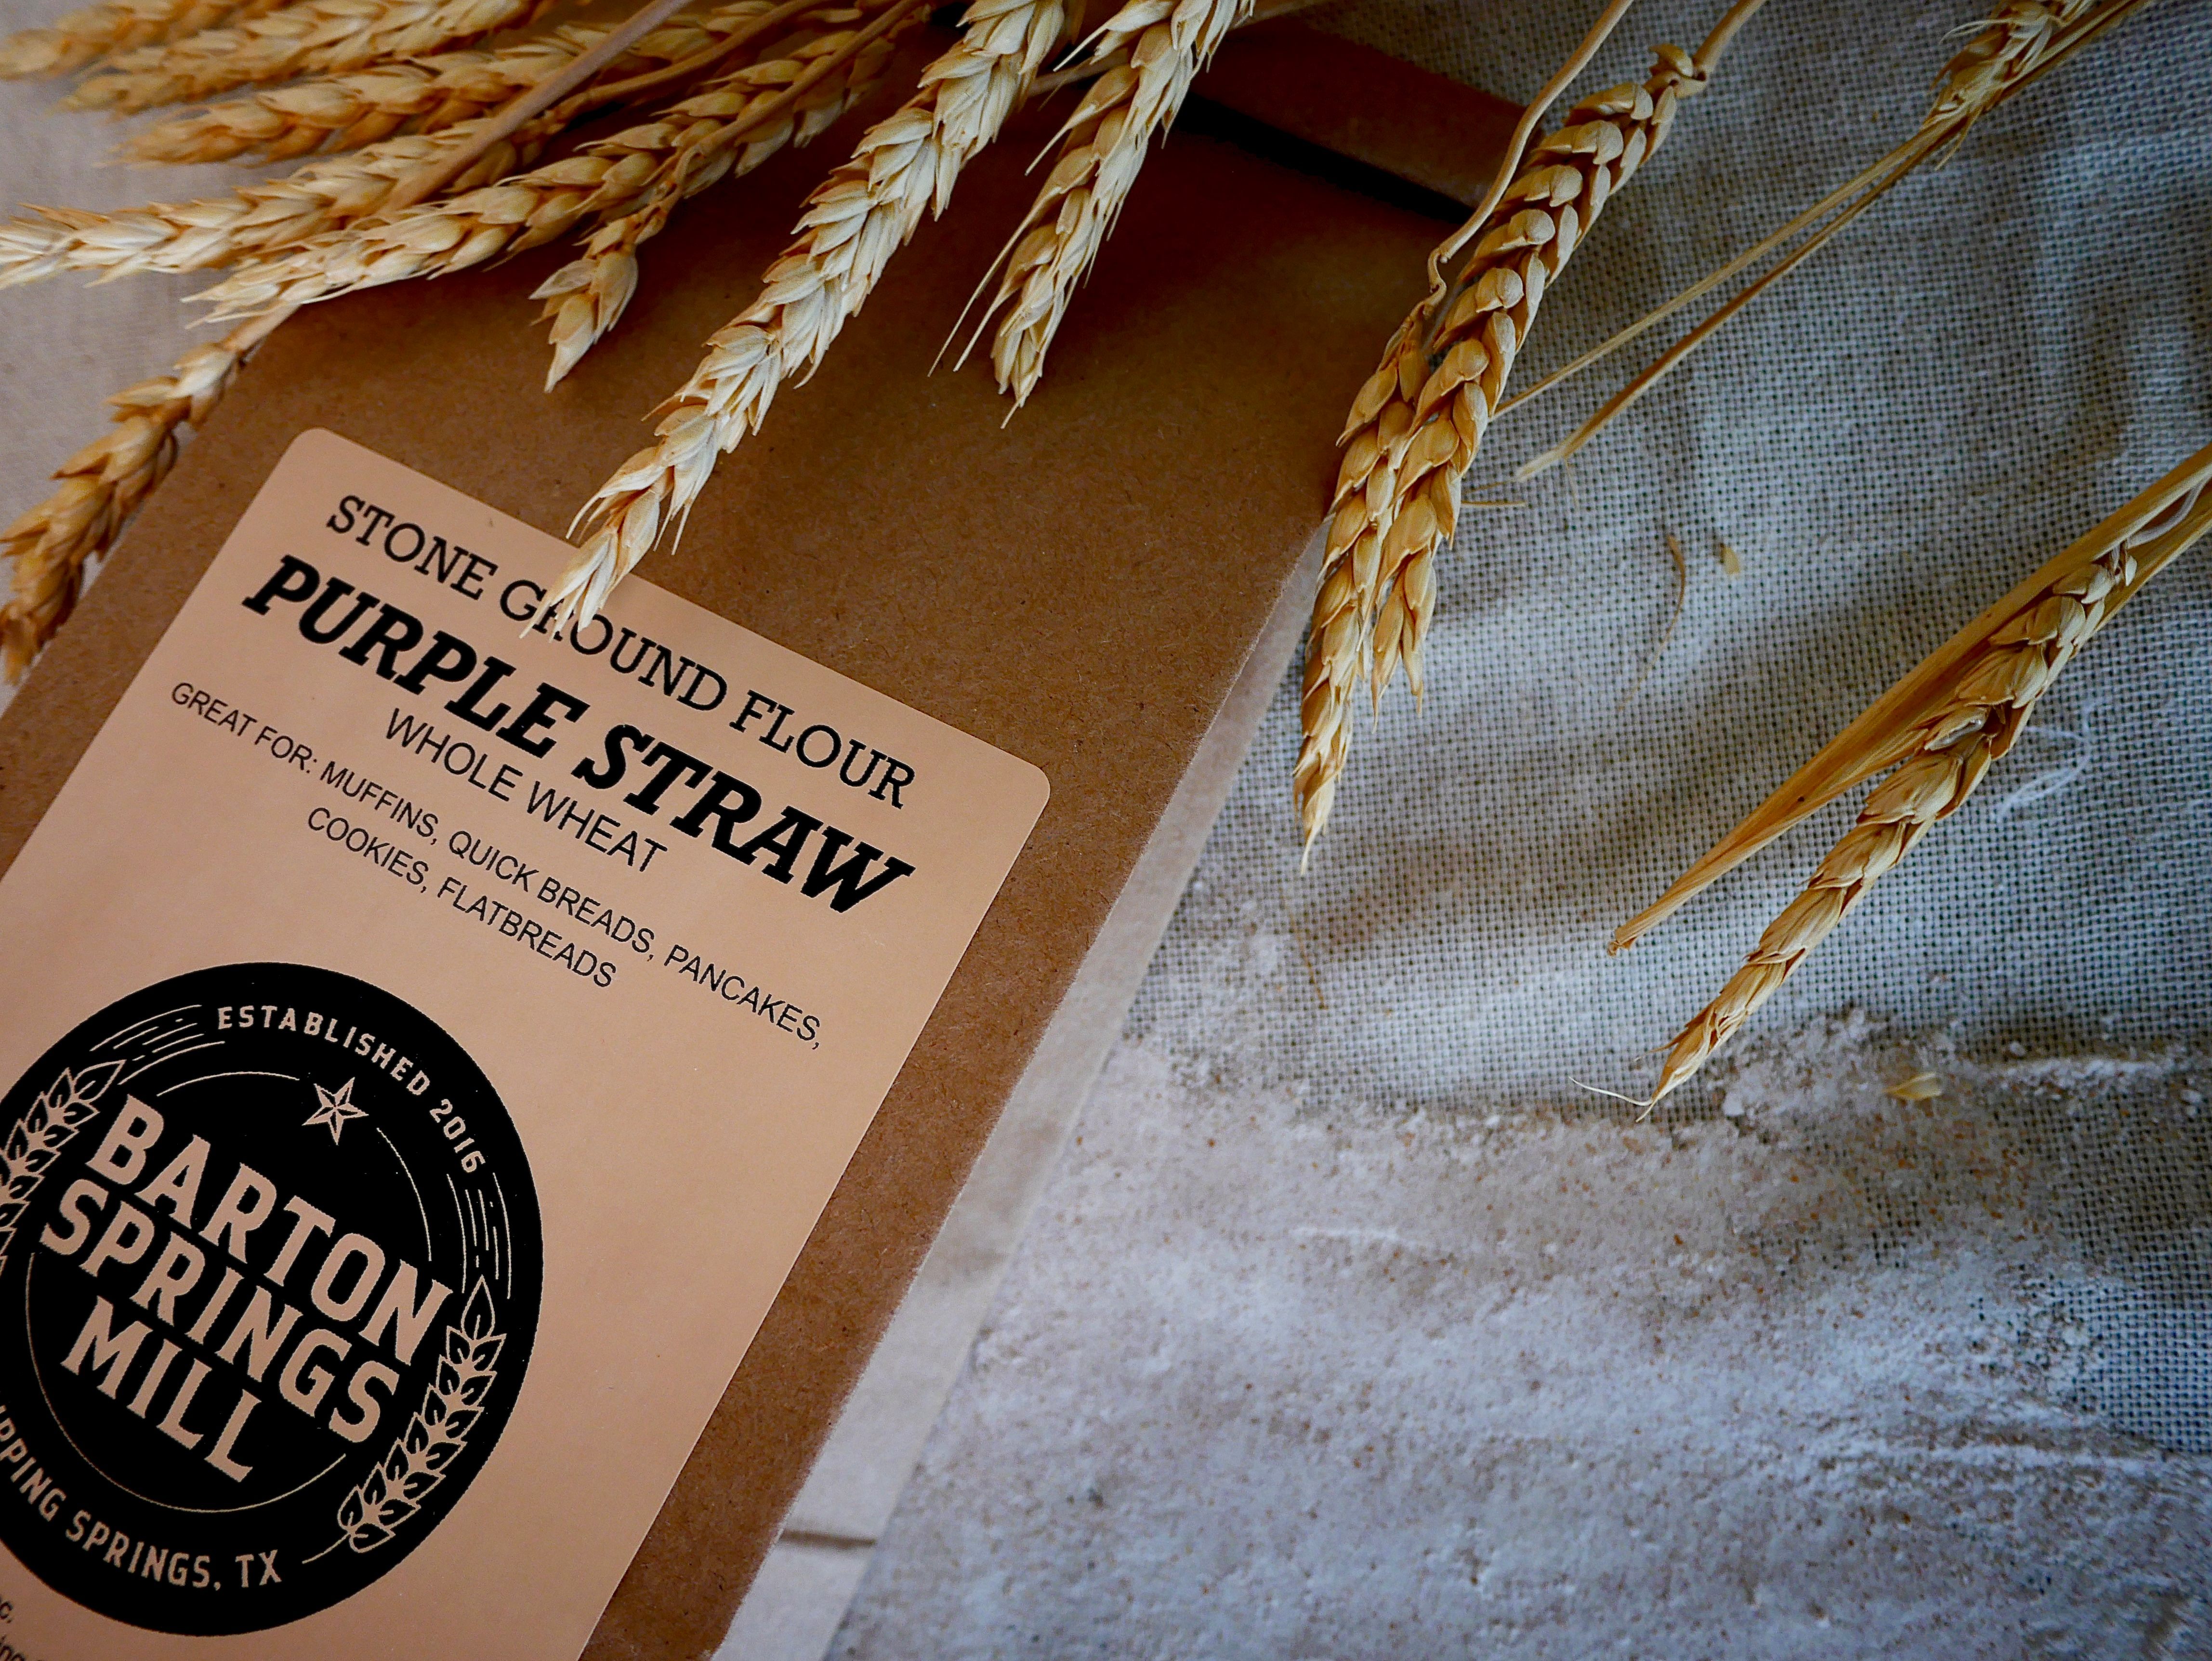 Barton Springs Mill is one of the few vendors actually selling purple-straw flour. 